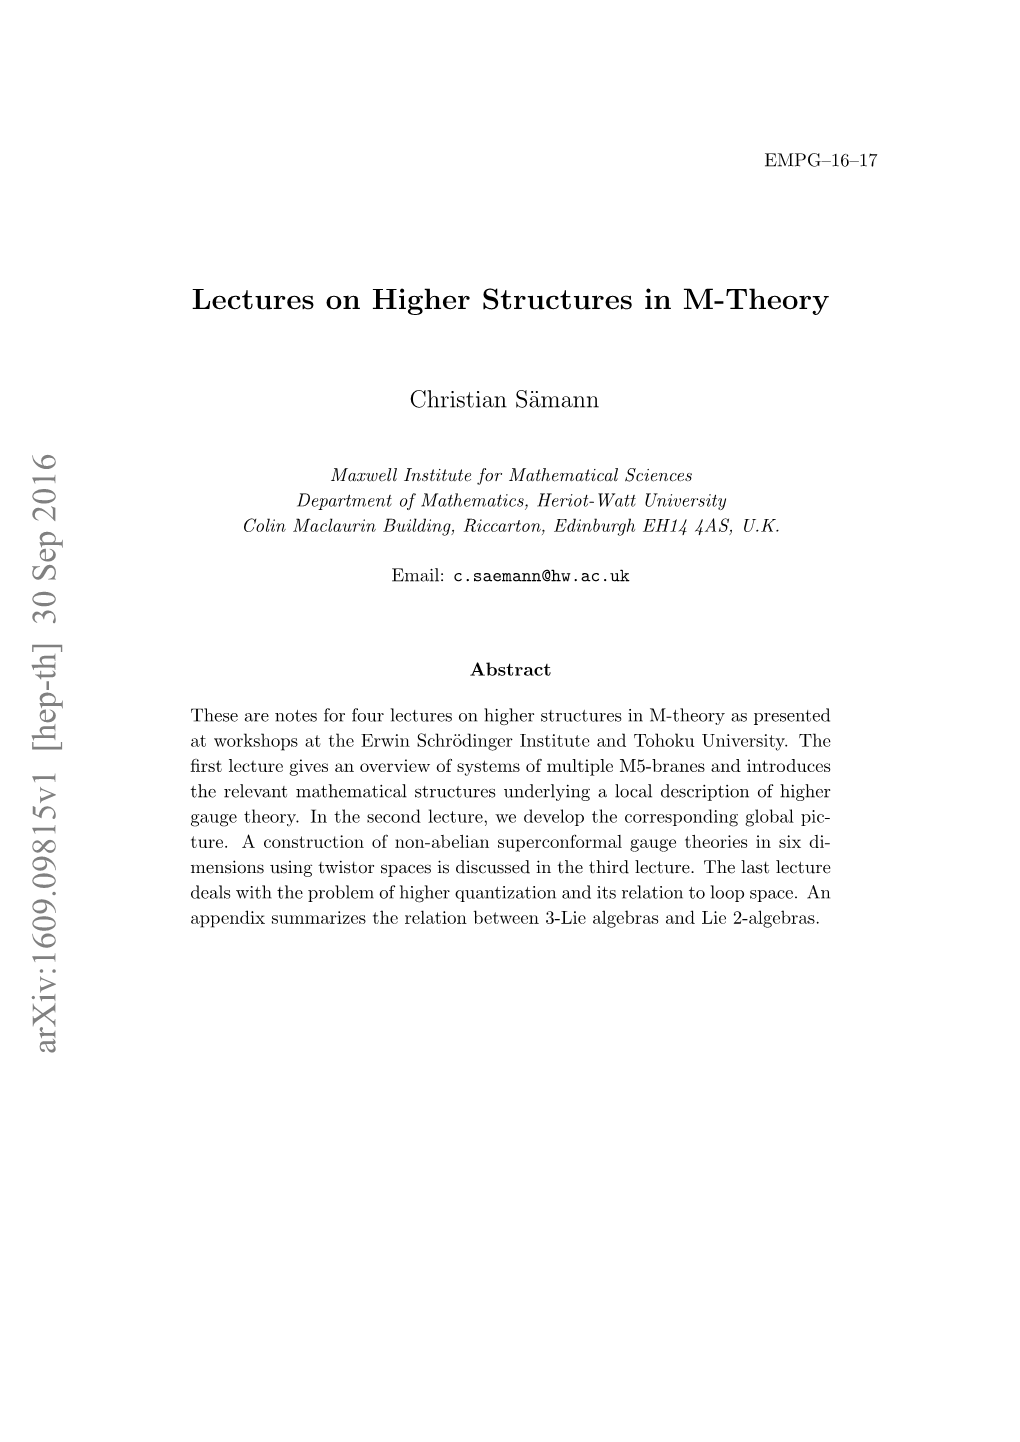 Lectures on Higher Structures in M-Theory